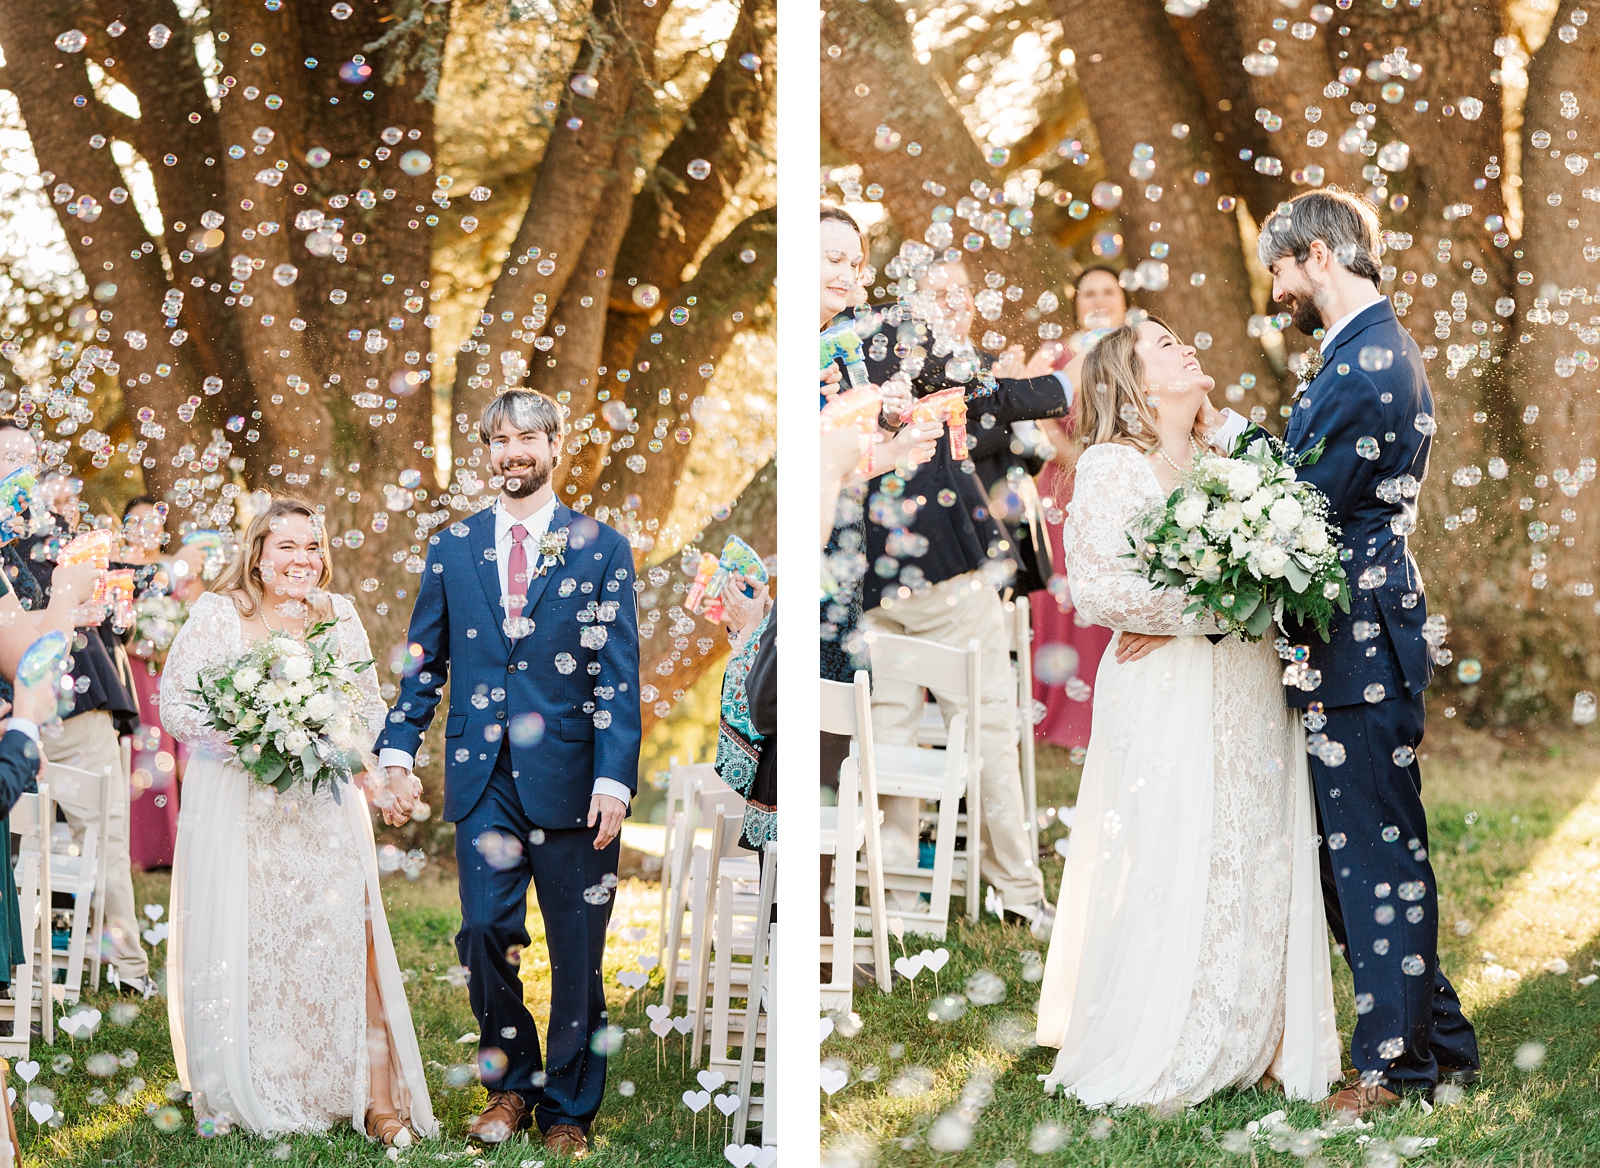 Ceremony Bubble Exit under Blue Cedar Atlas Tree at Fall Maymont Wedding. Photography by Virginia Wedding Photographer Kailey Brianne Photography.